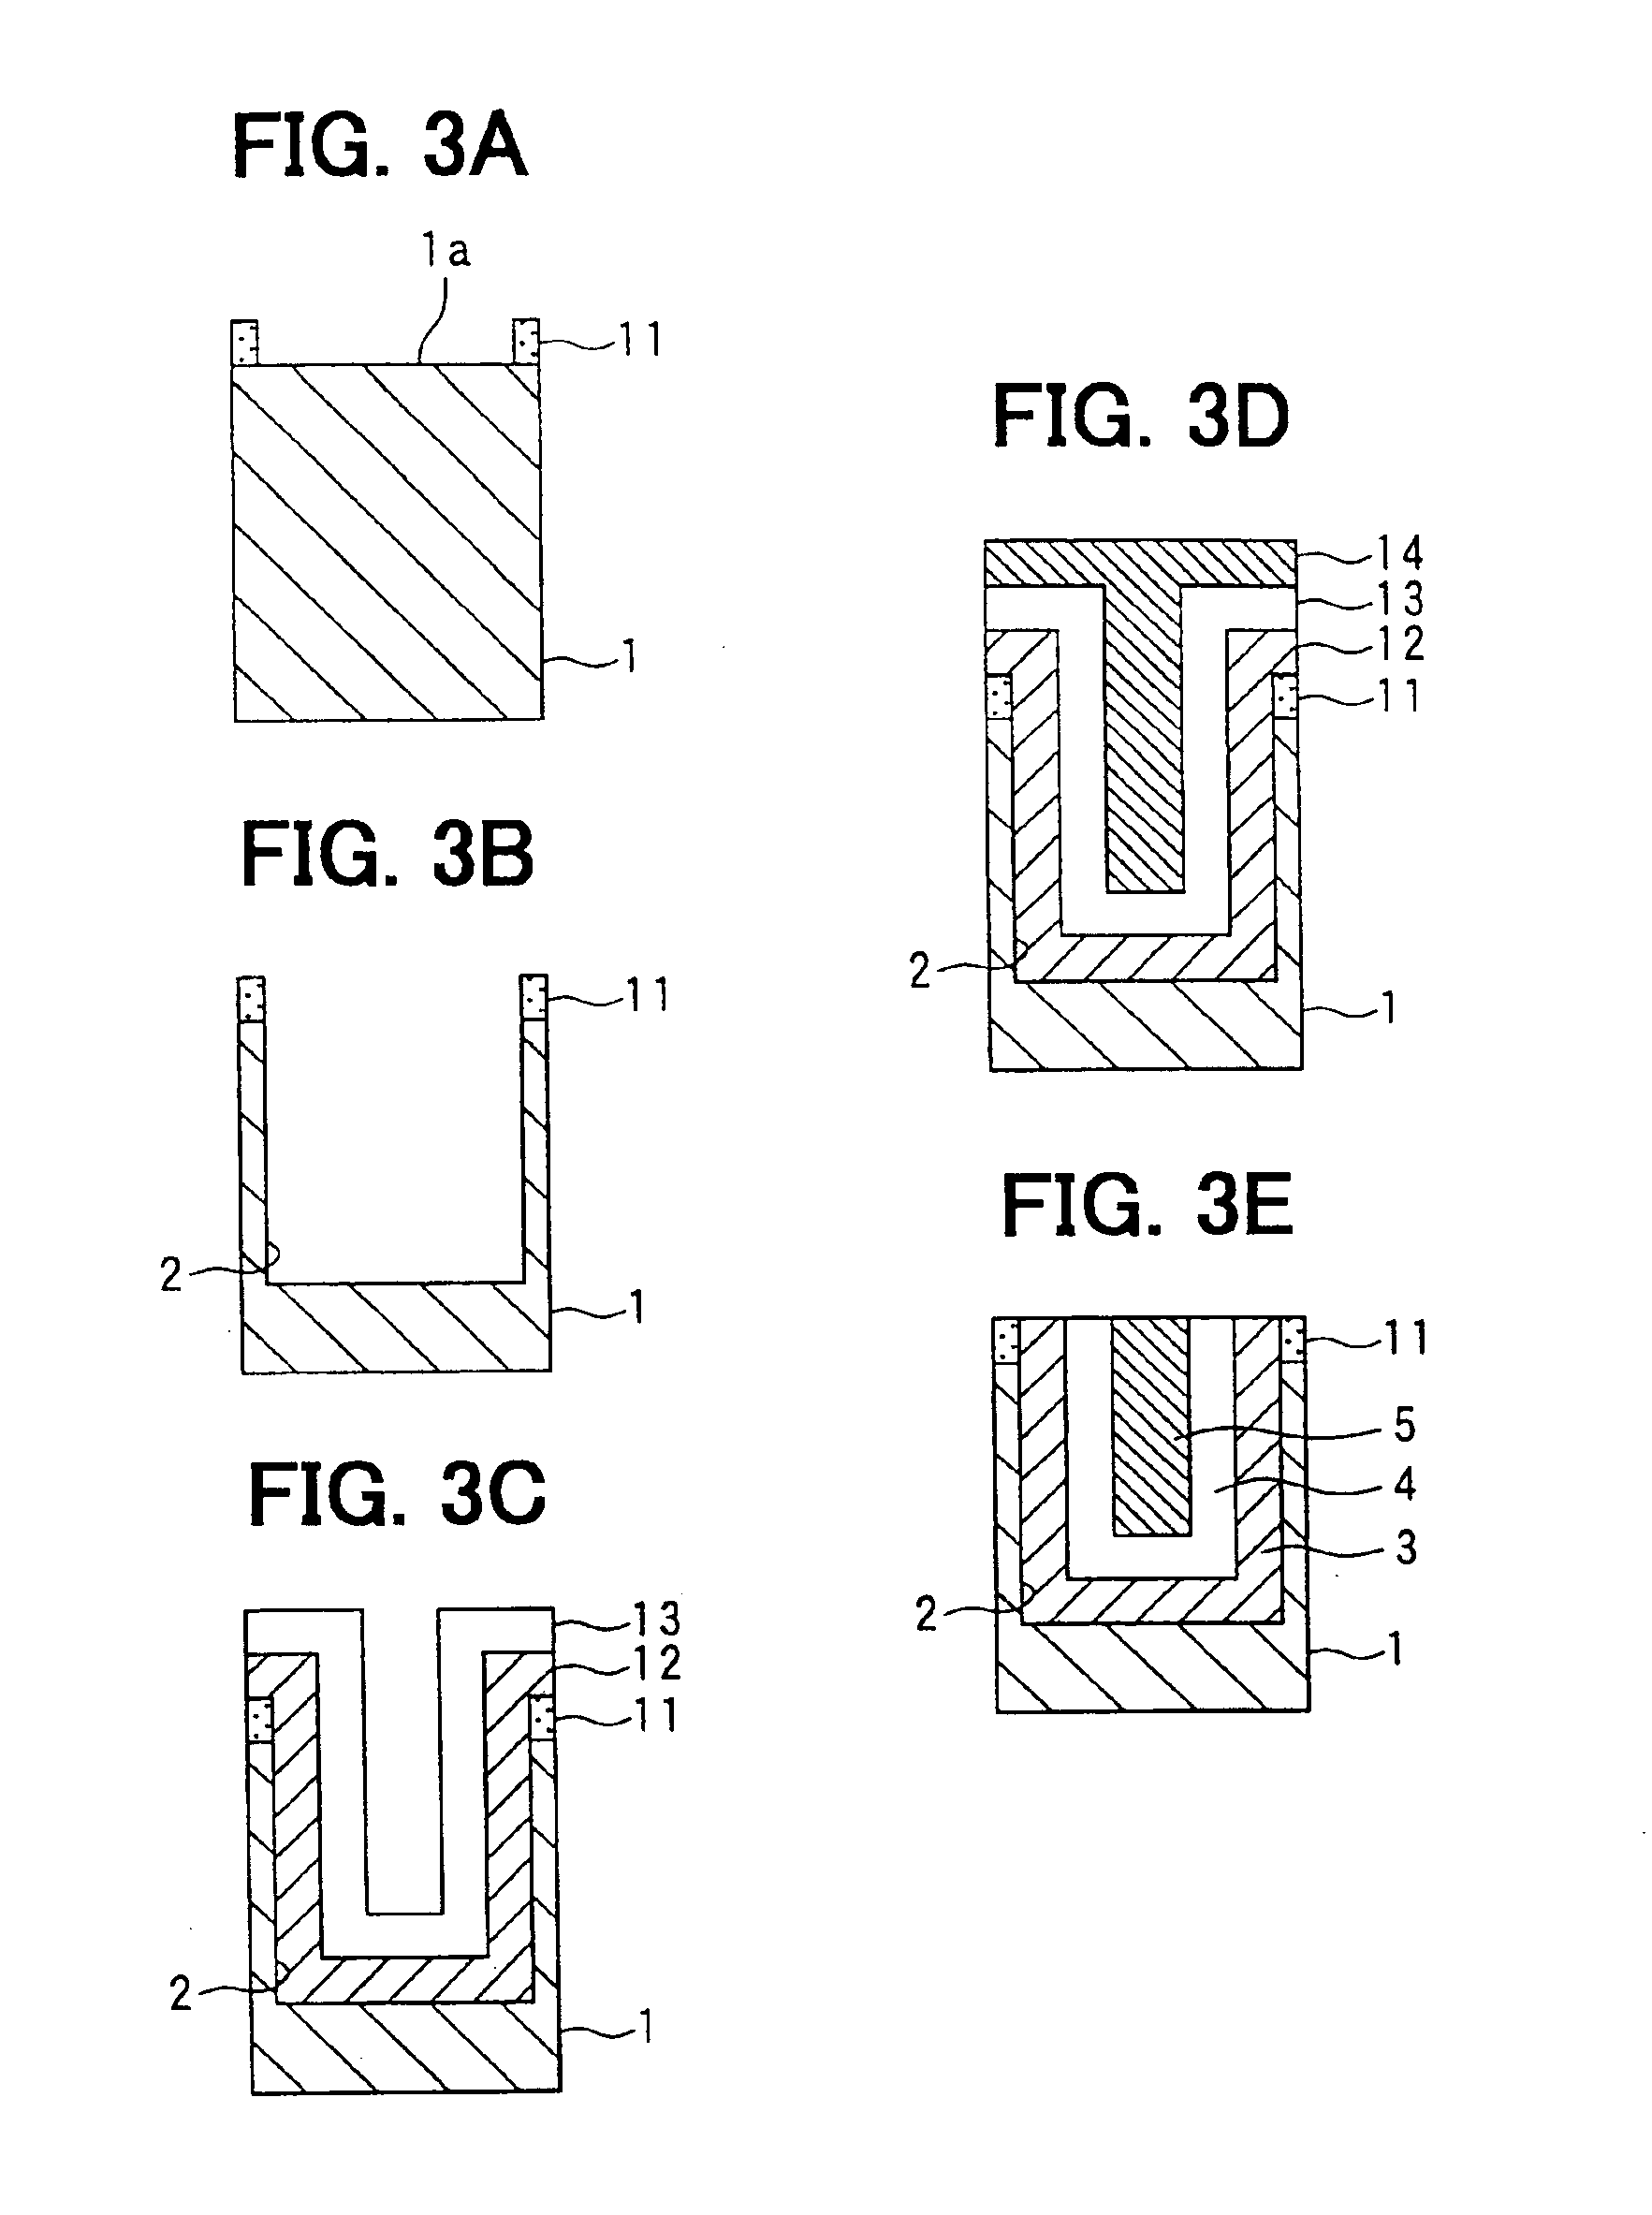 Semiconductor device having high breakdown voltage without increased on resistance